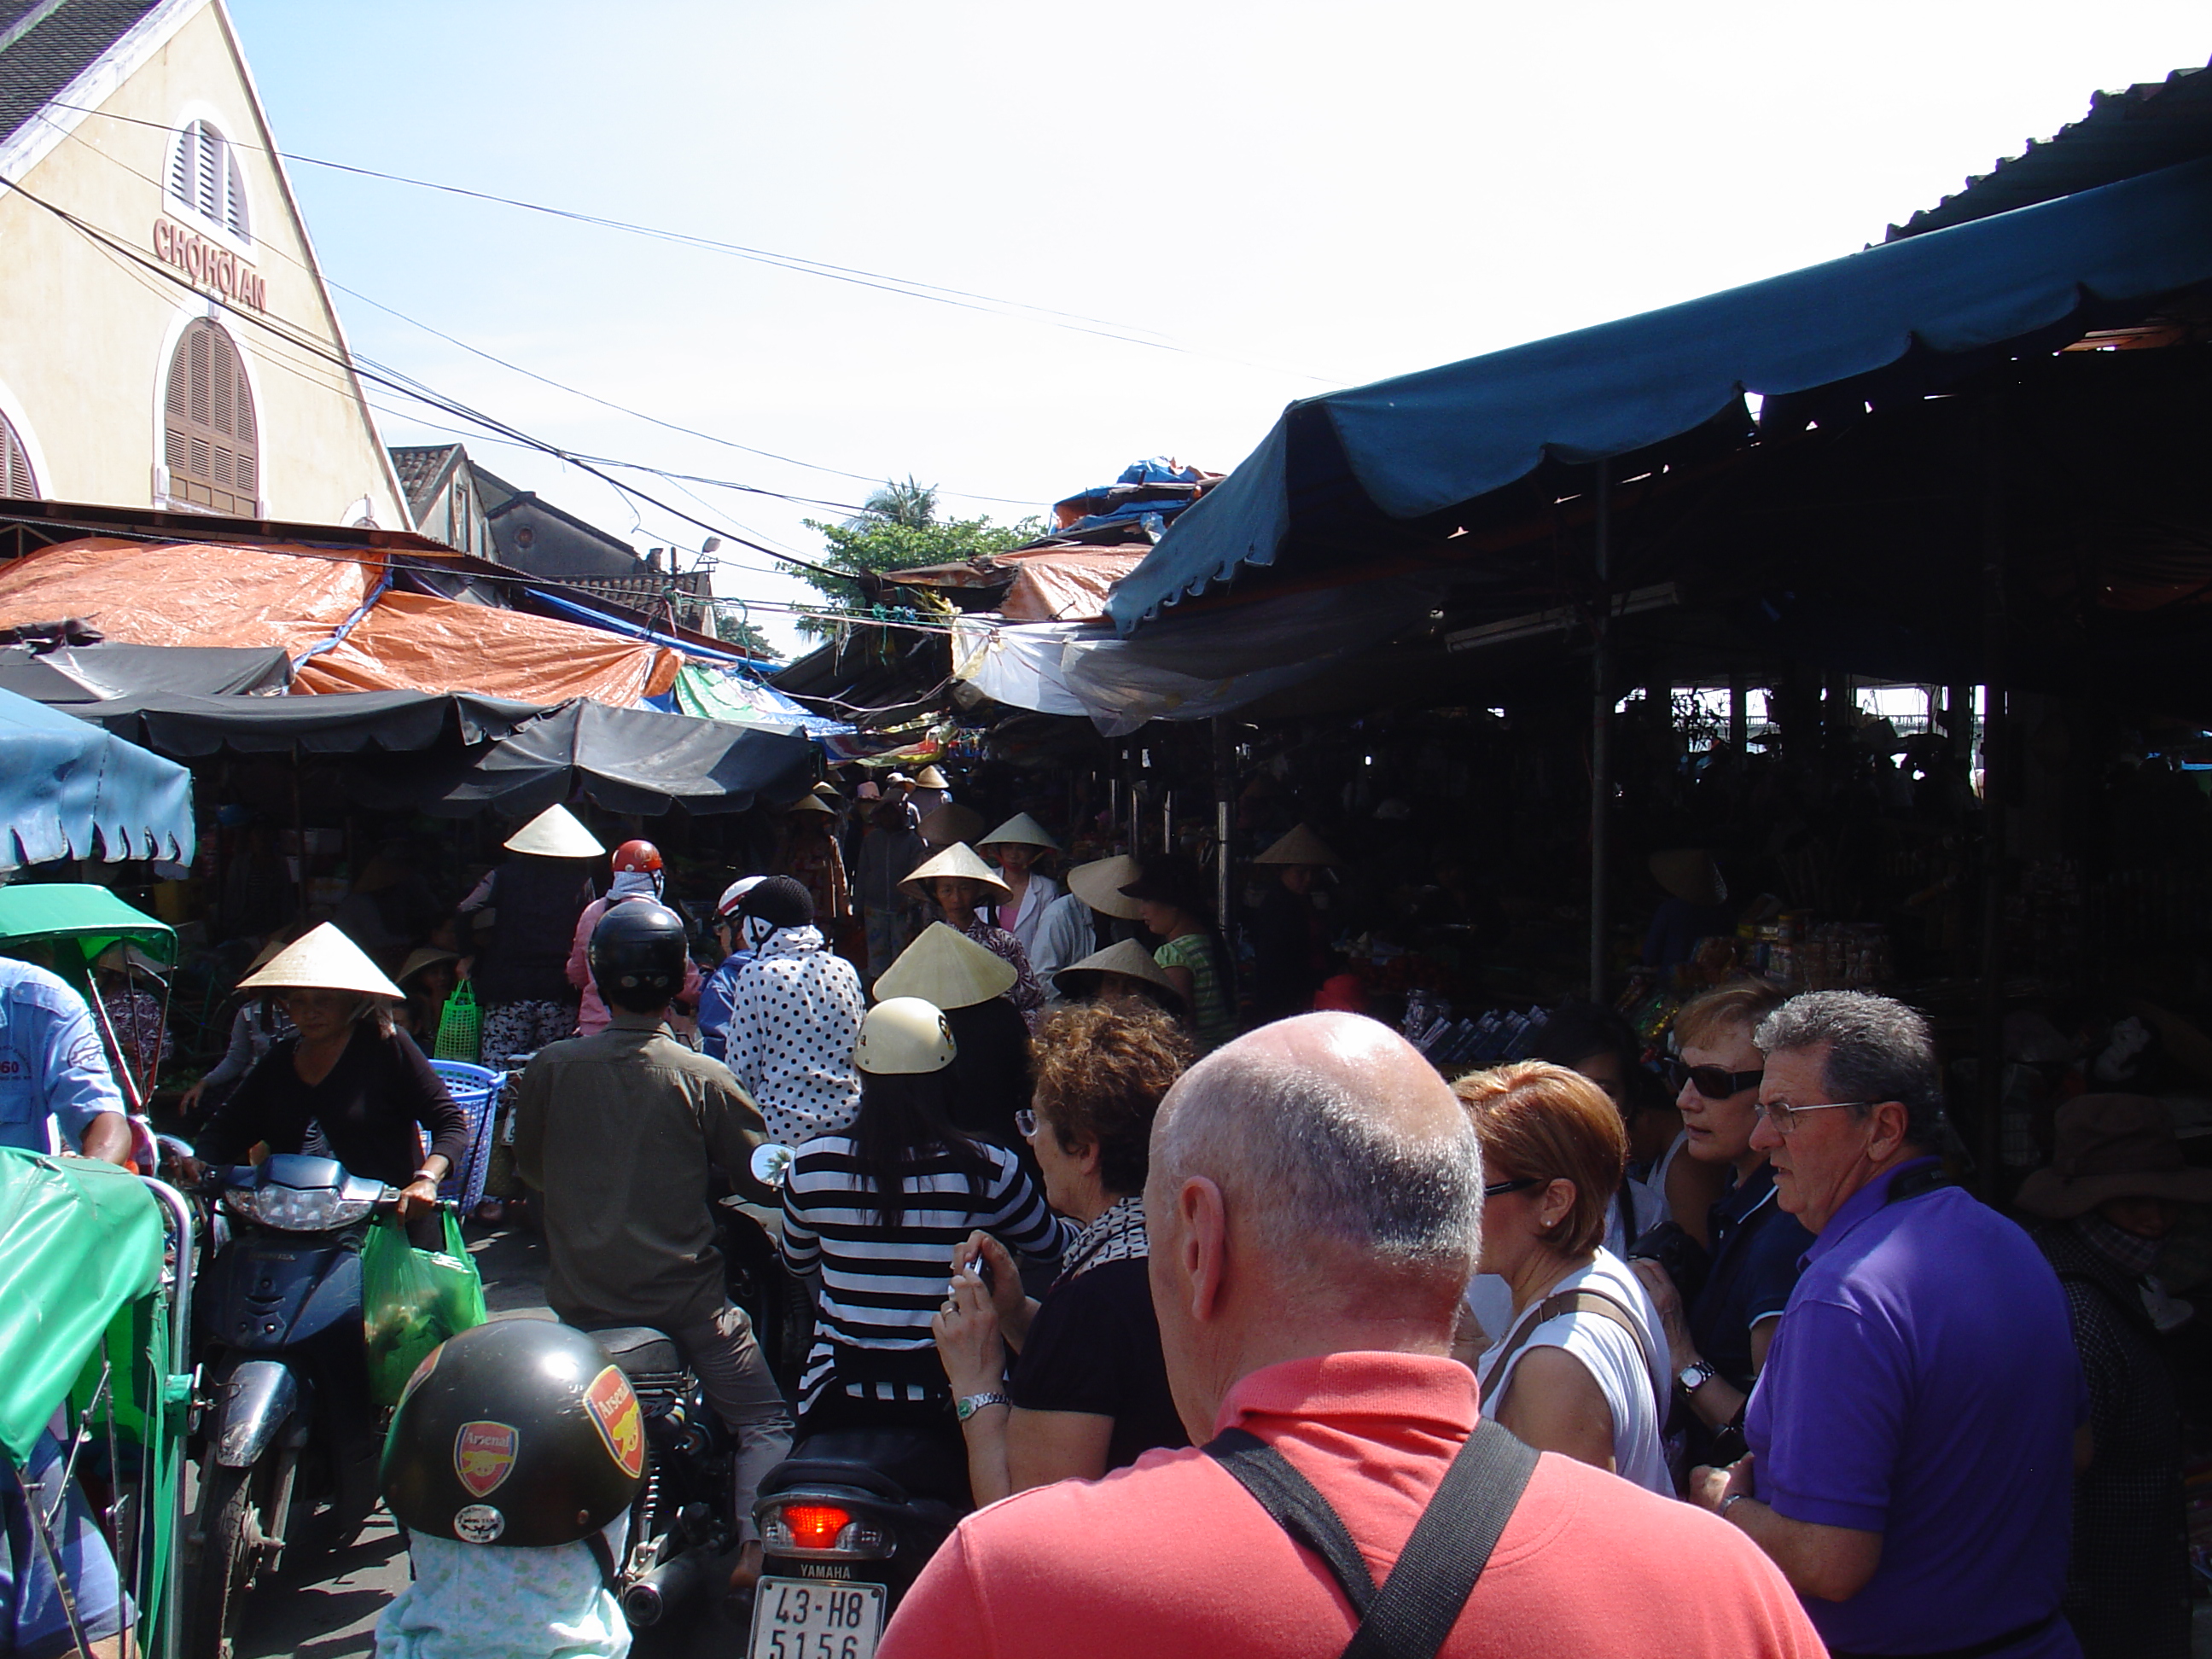 The central market in Hoi An.